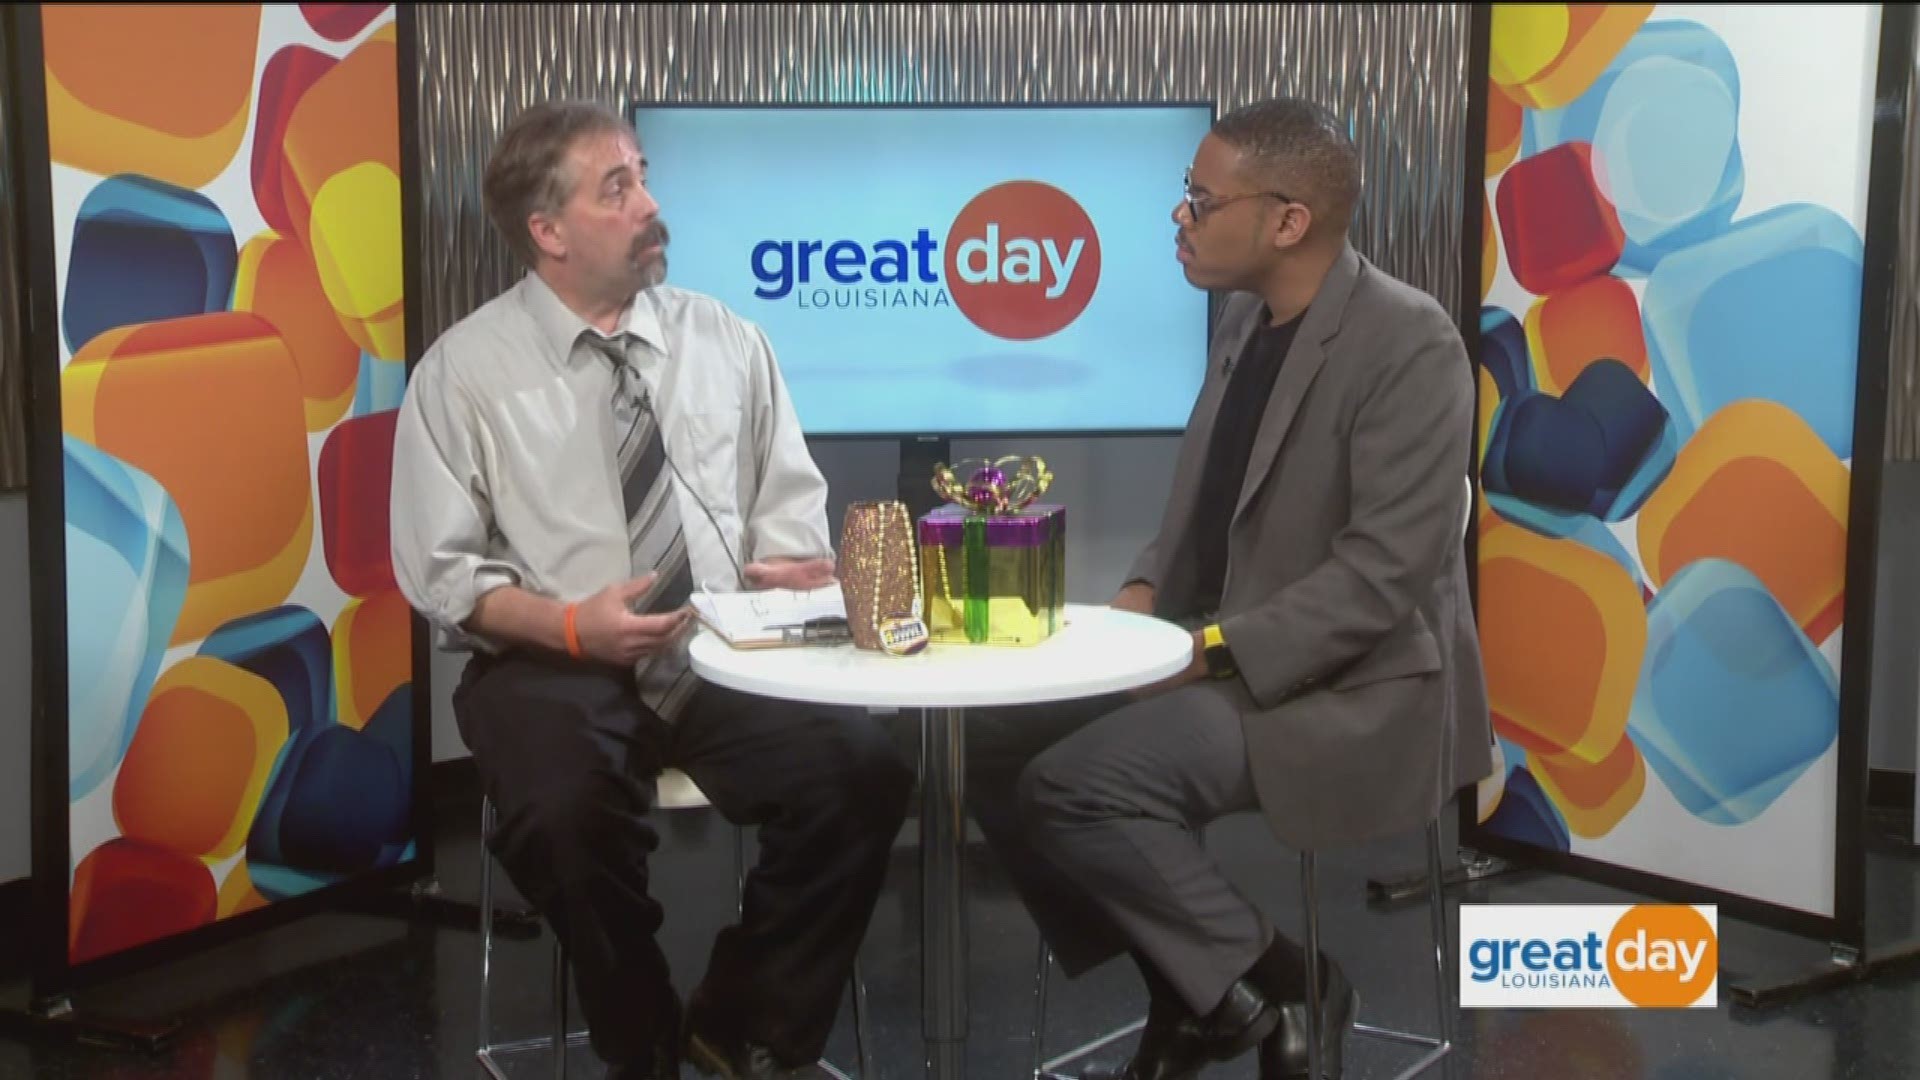 Patrick Courreges from the Department of Natural Resources discussed easy ways to save money on energy bills.